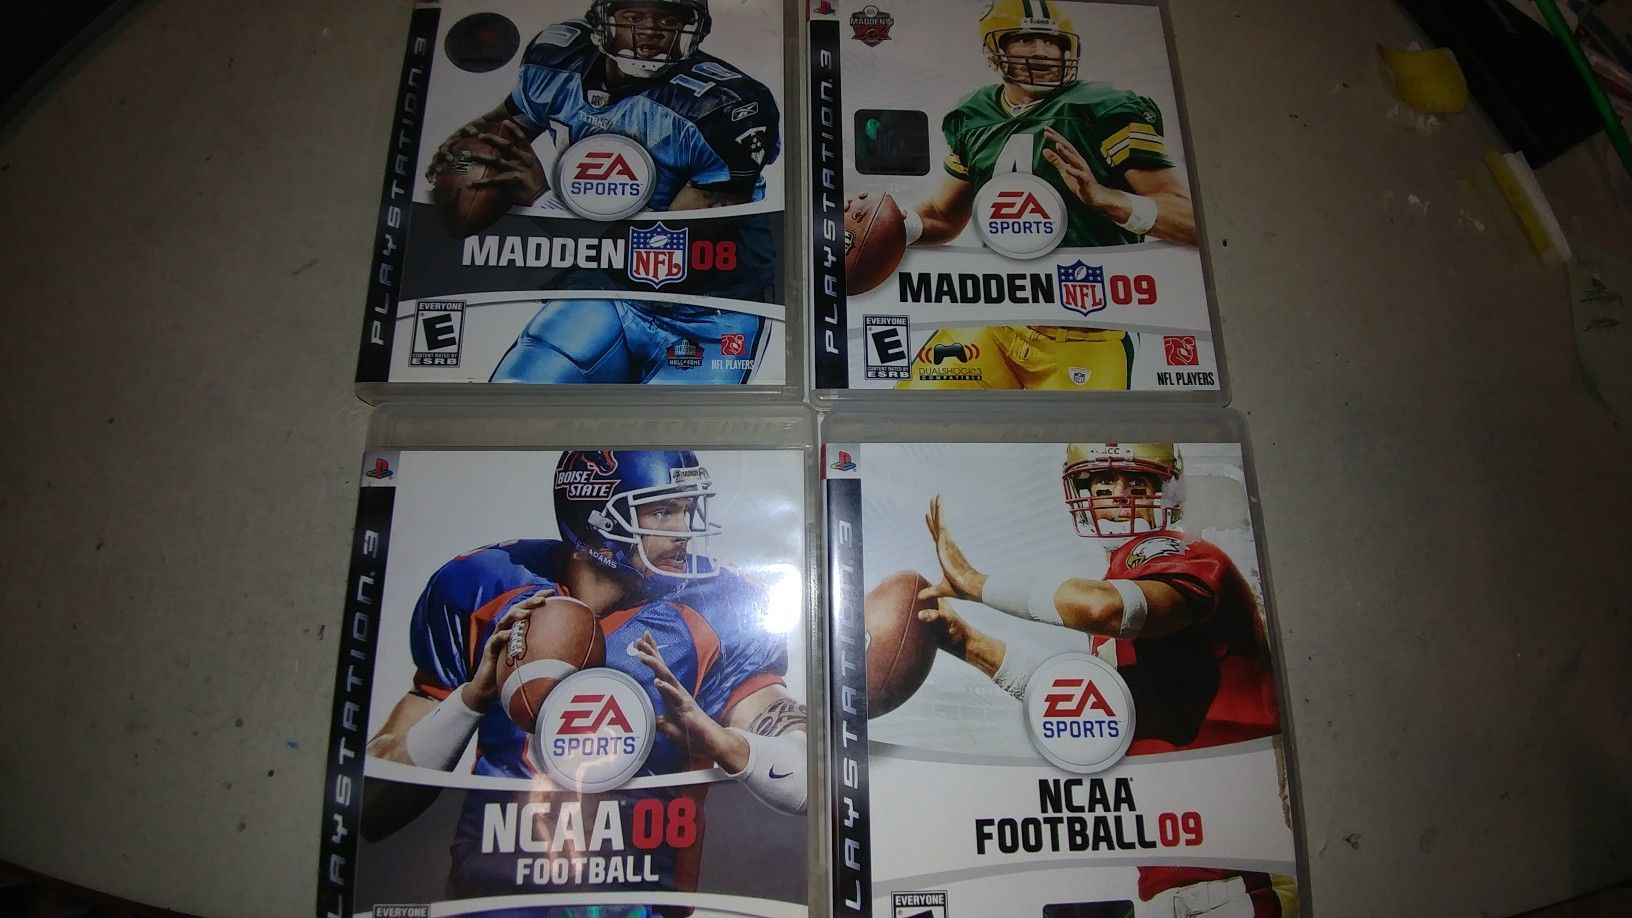 PS3 and PS2 football games